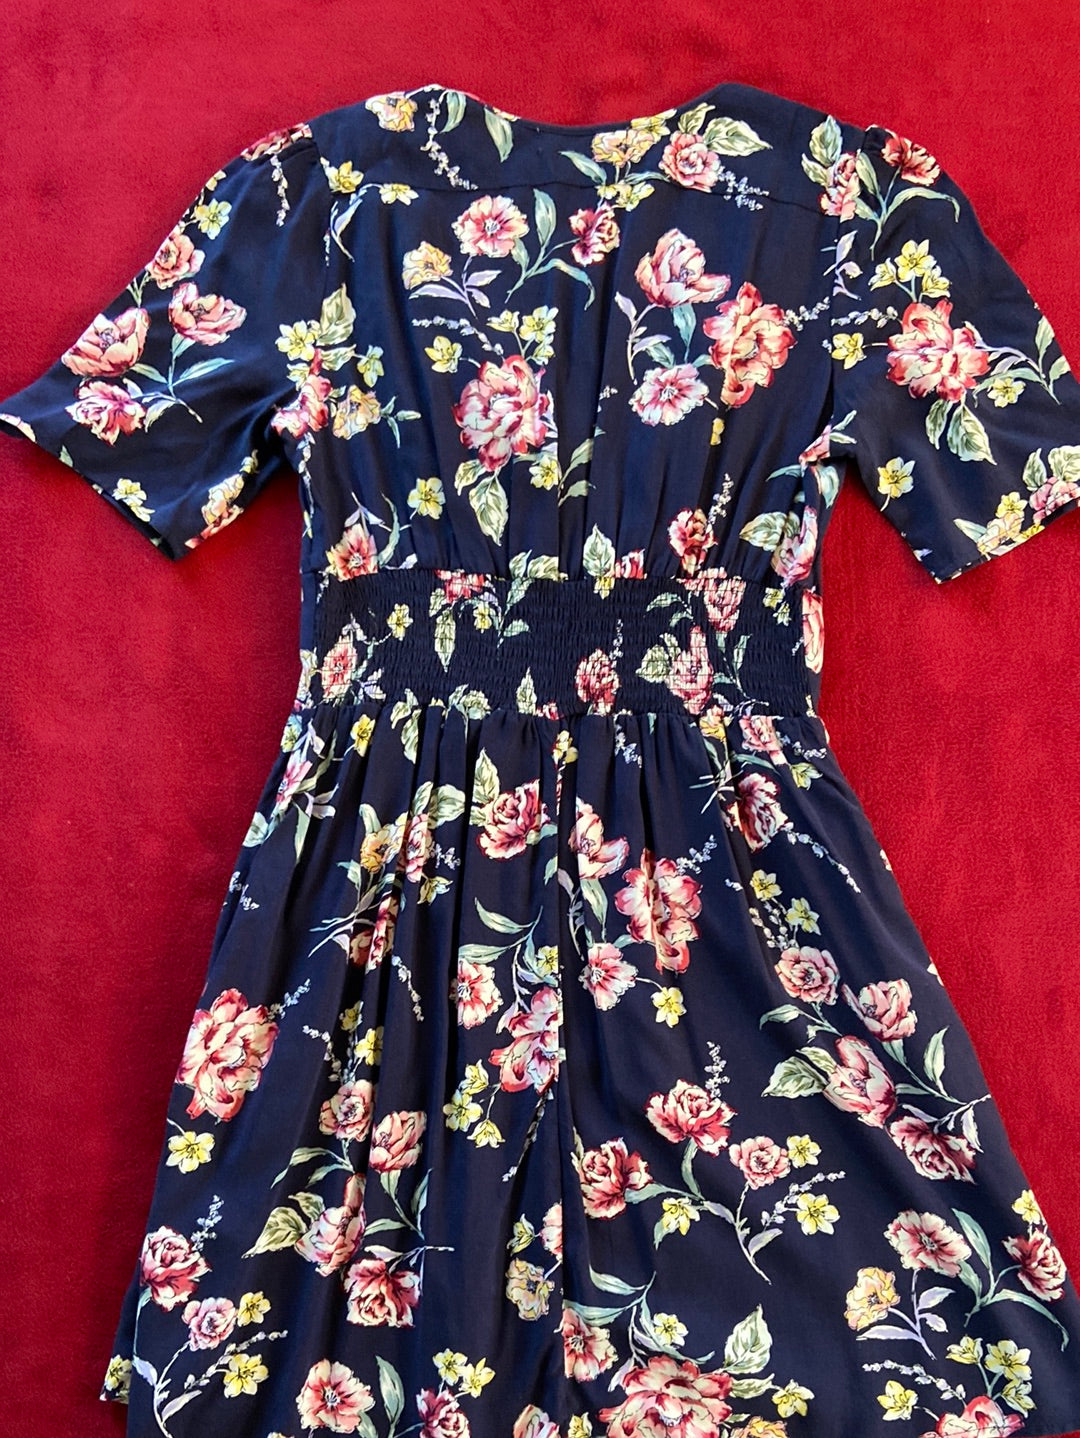 FLORAL FROCK Band of Gypsies Dress Size M